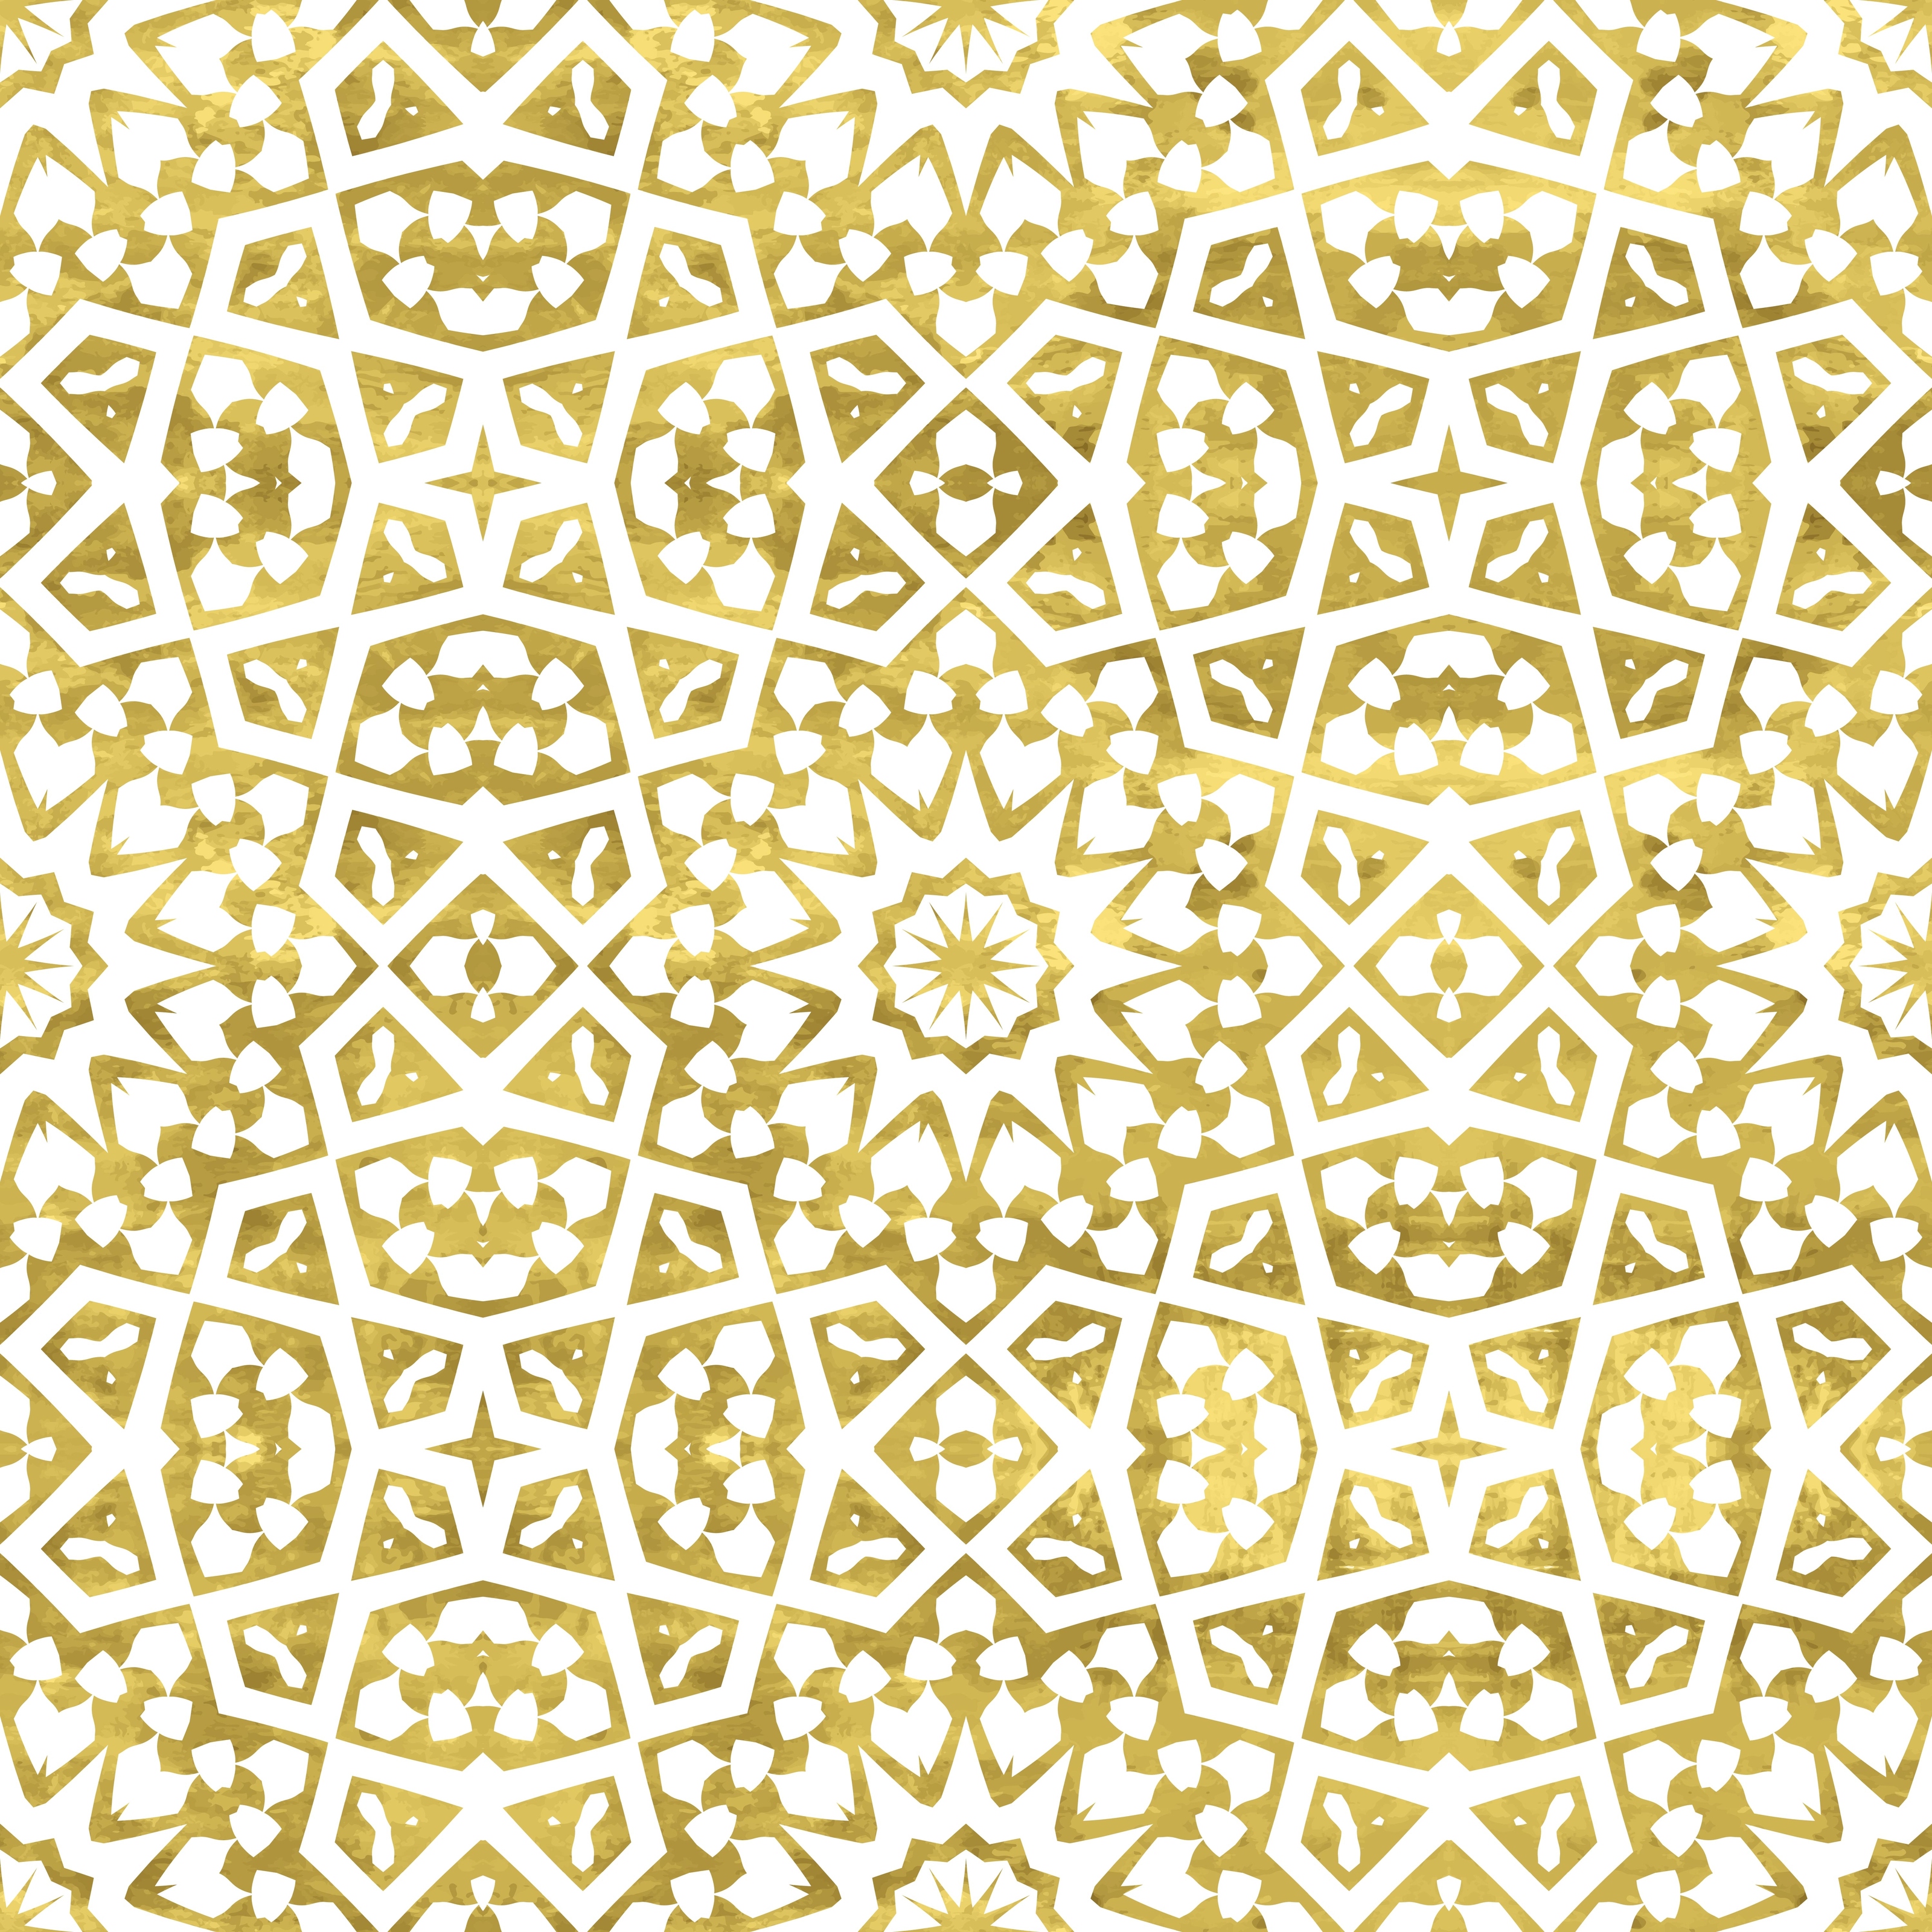 Buy 16 Feet Arabesque Buta 180 Gsm Wallpaper Roll at 24 OFF by Space Of  Joy  Pepperfry